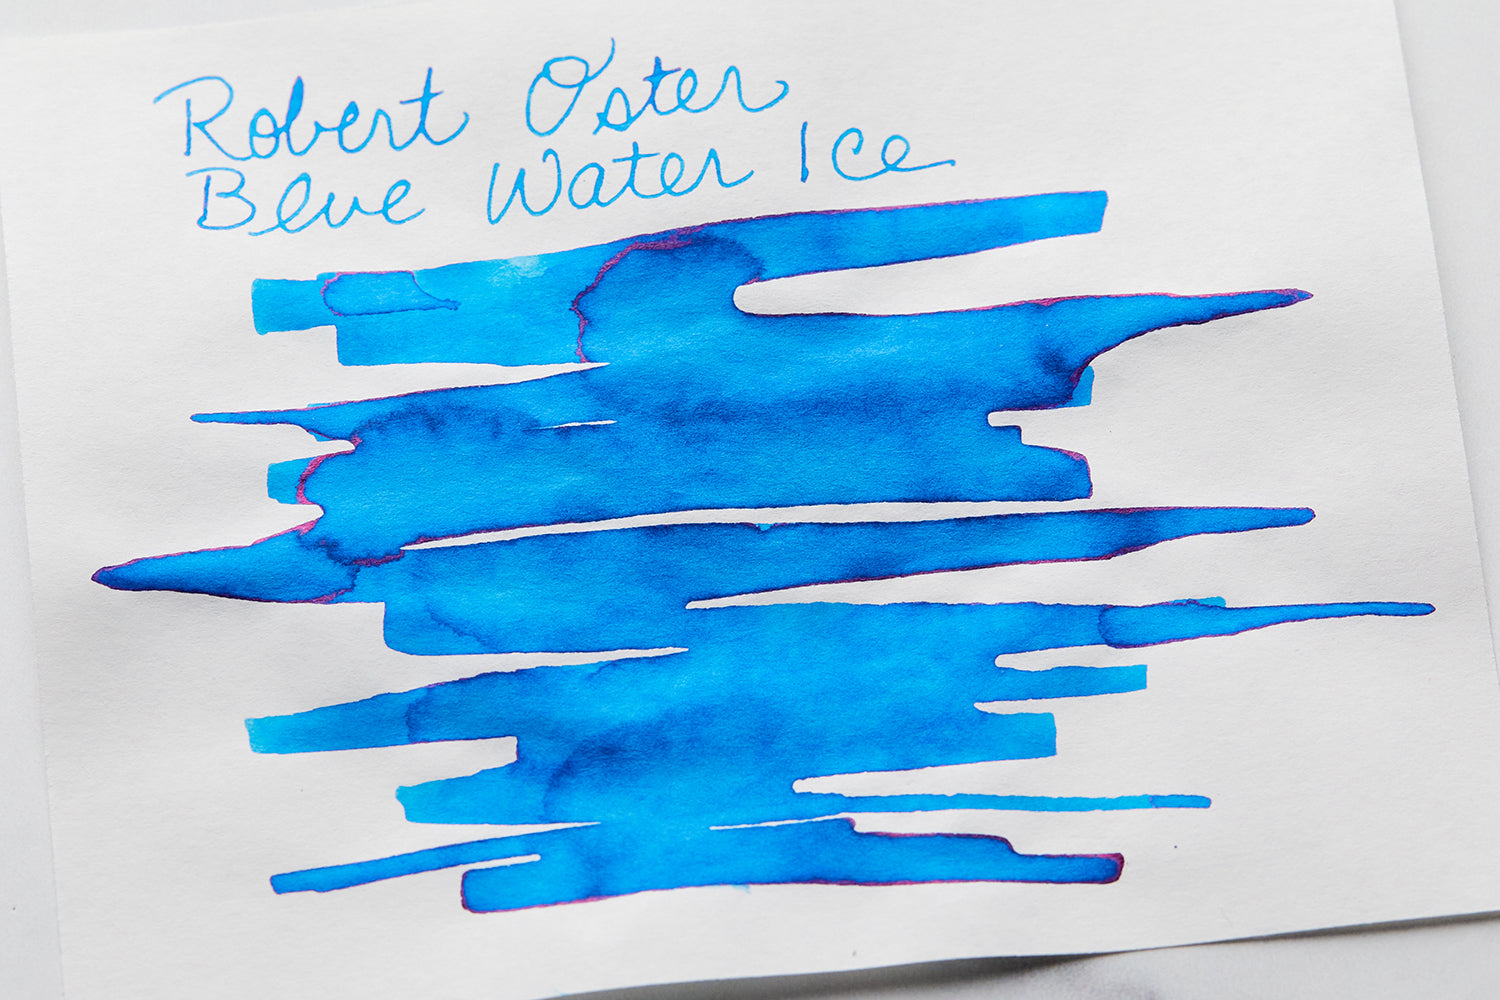 Robert Oster Blue Water Ice Fountain Pen ink swatch on white paper